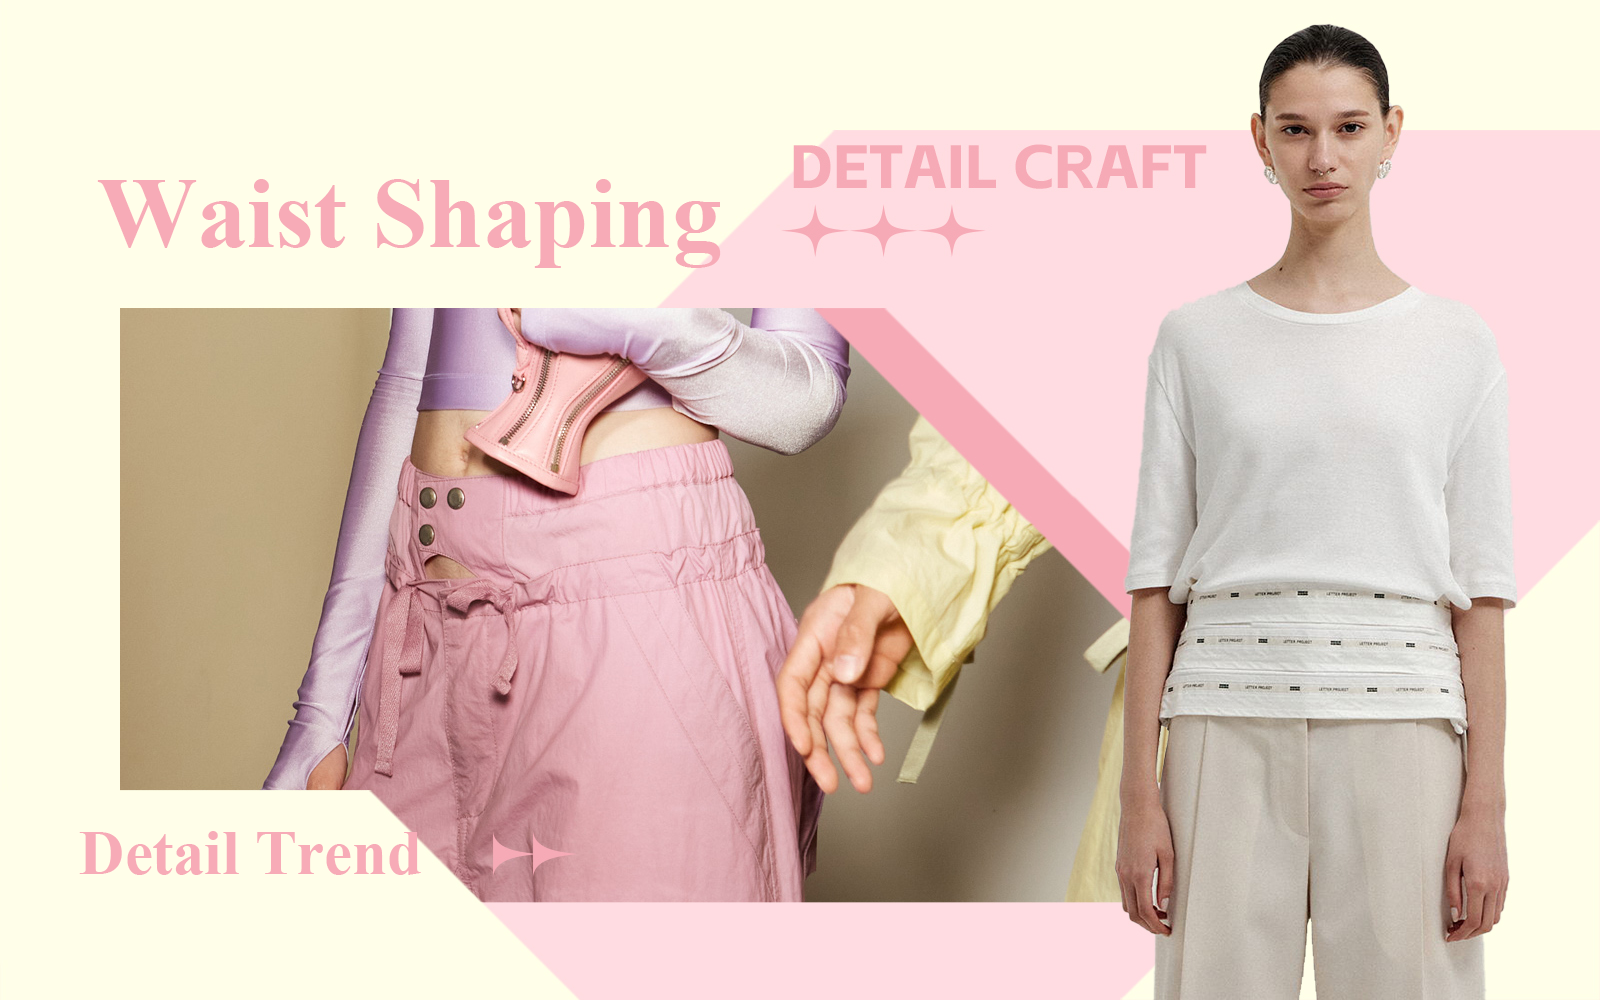 Waist Shaping -- The Detail & Craft Trend for Womenswear